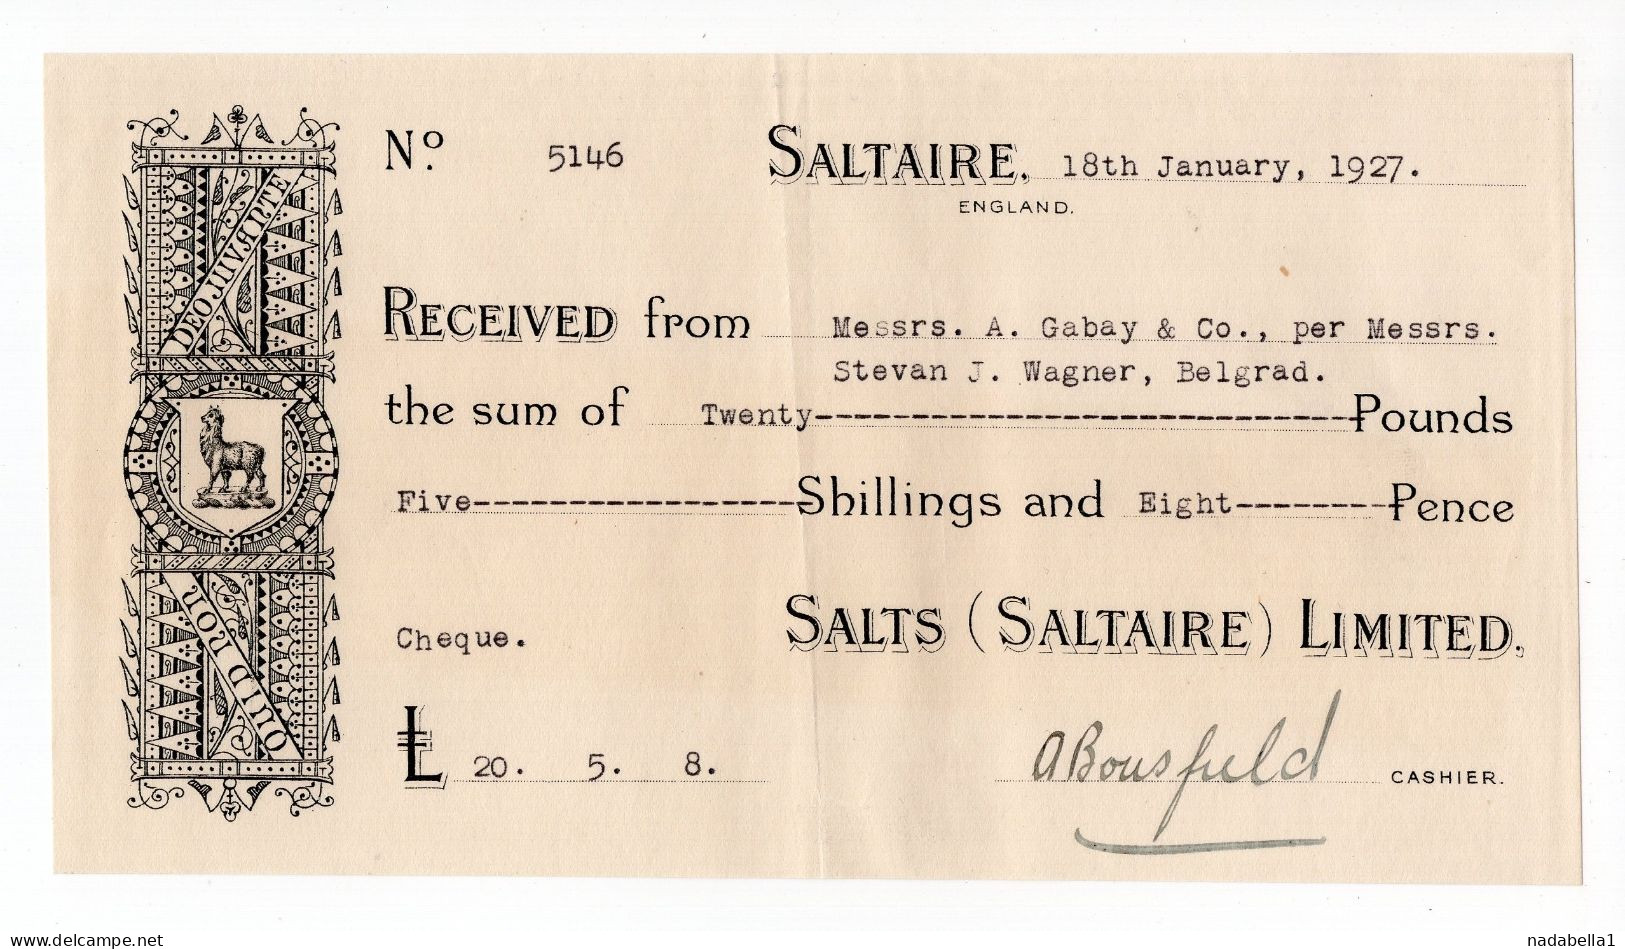 1927. UNITED KINGDOM,ENGLAND,SALTAIRE,RECEIPT FOR A CHEQUE,SALTS (SALTAIRE) LTD. ,LAWYER S.J. WAGNER,SERBIA - Cheques En Traveller's Cheques